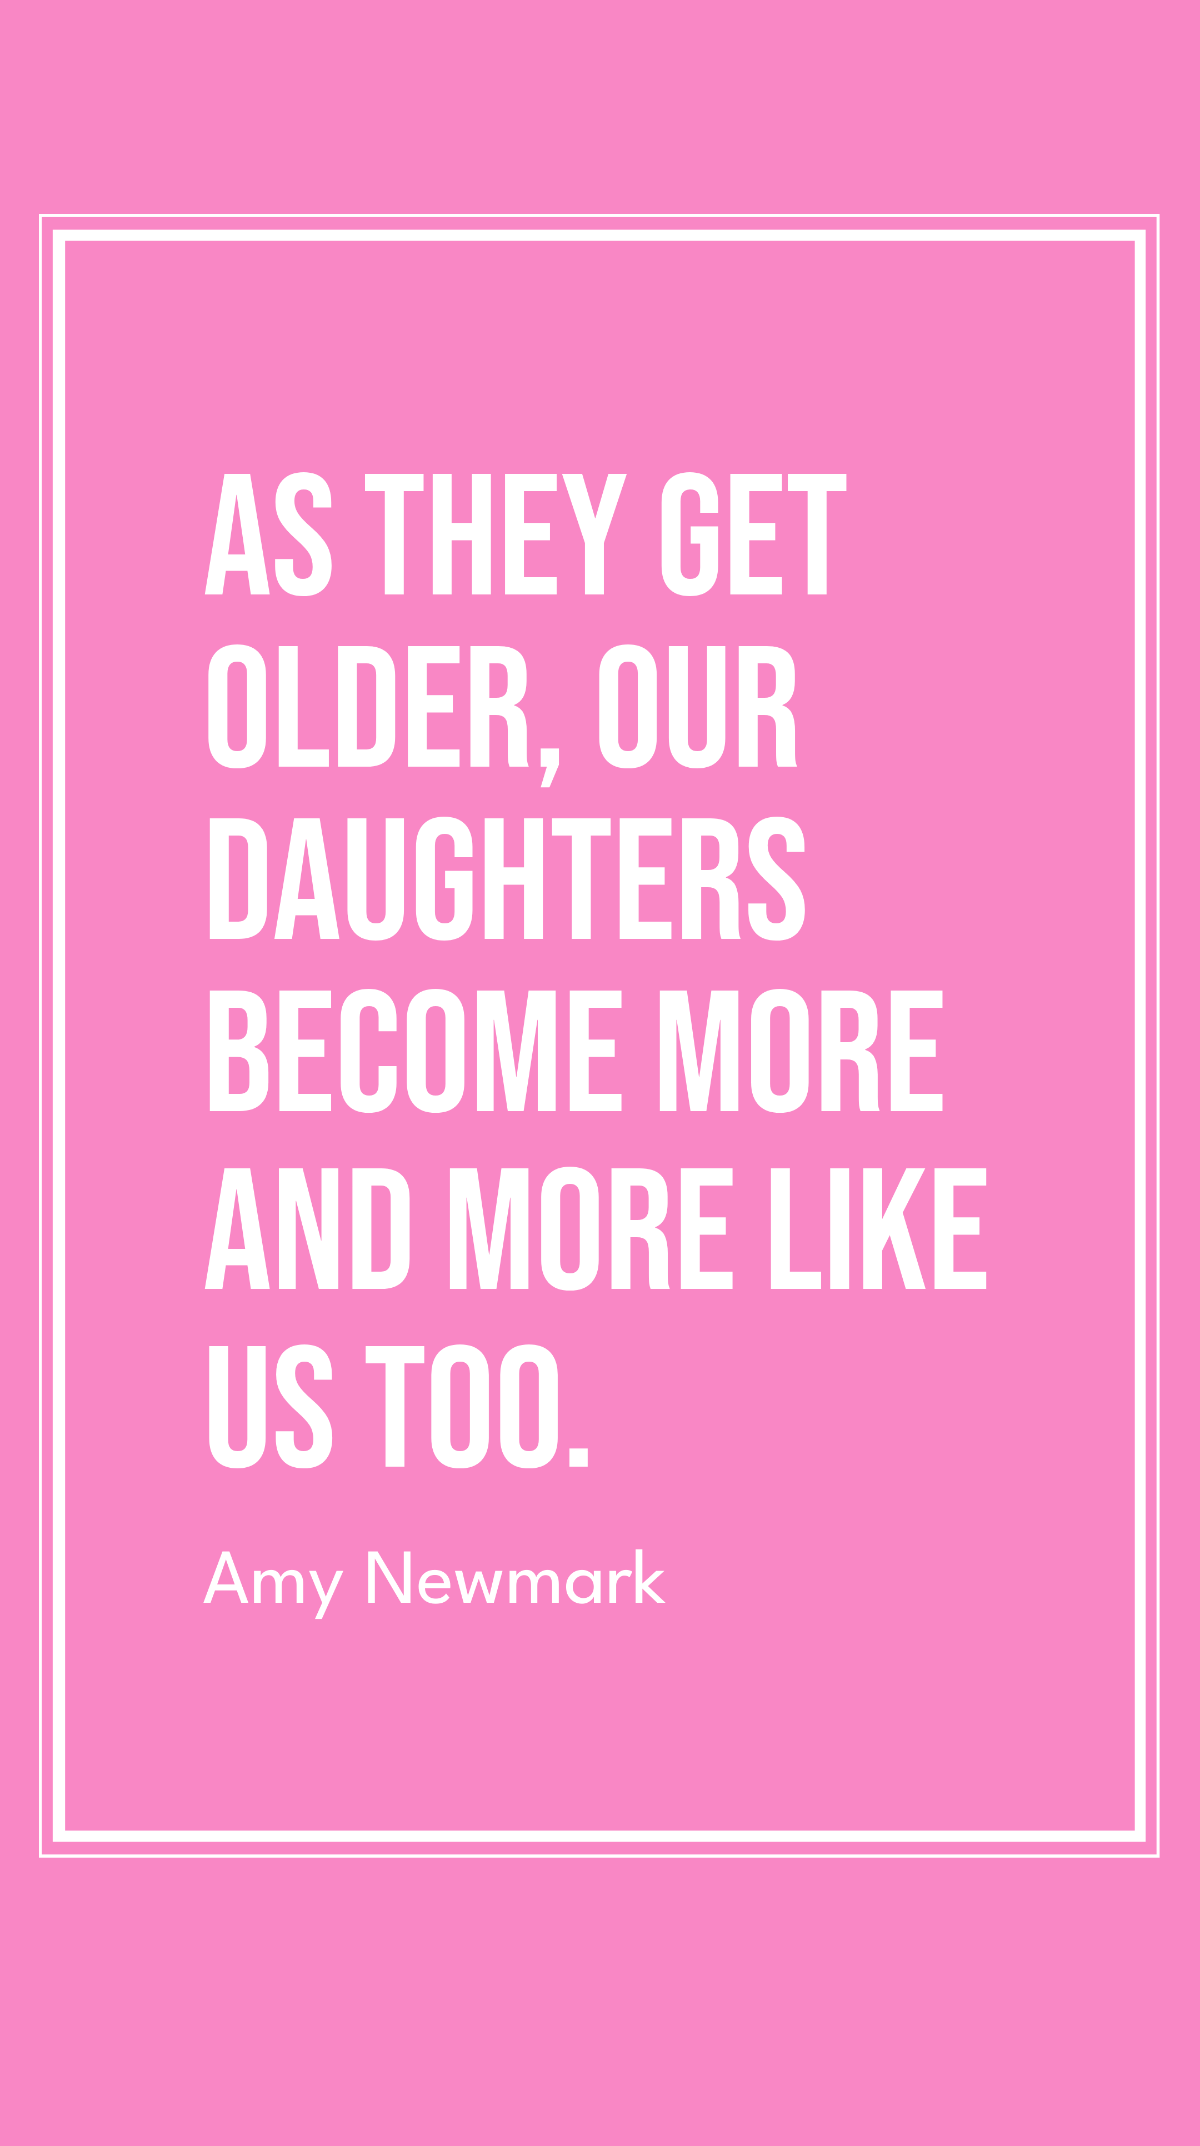 Amy Newmark - As they get older, our daughters become more and more like us too. Template